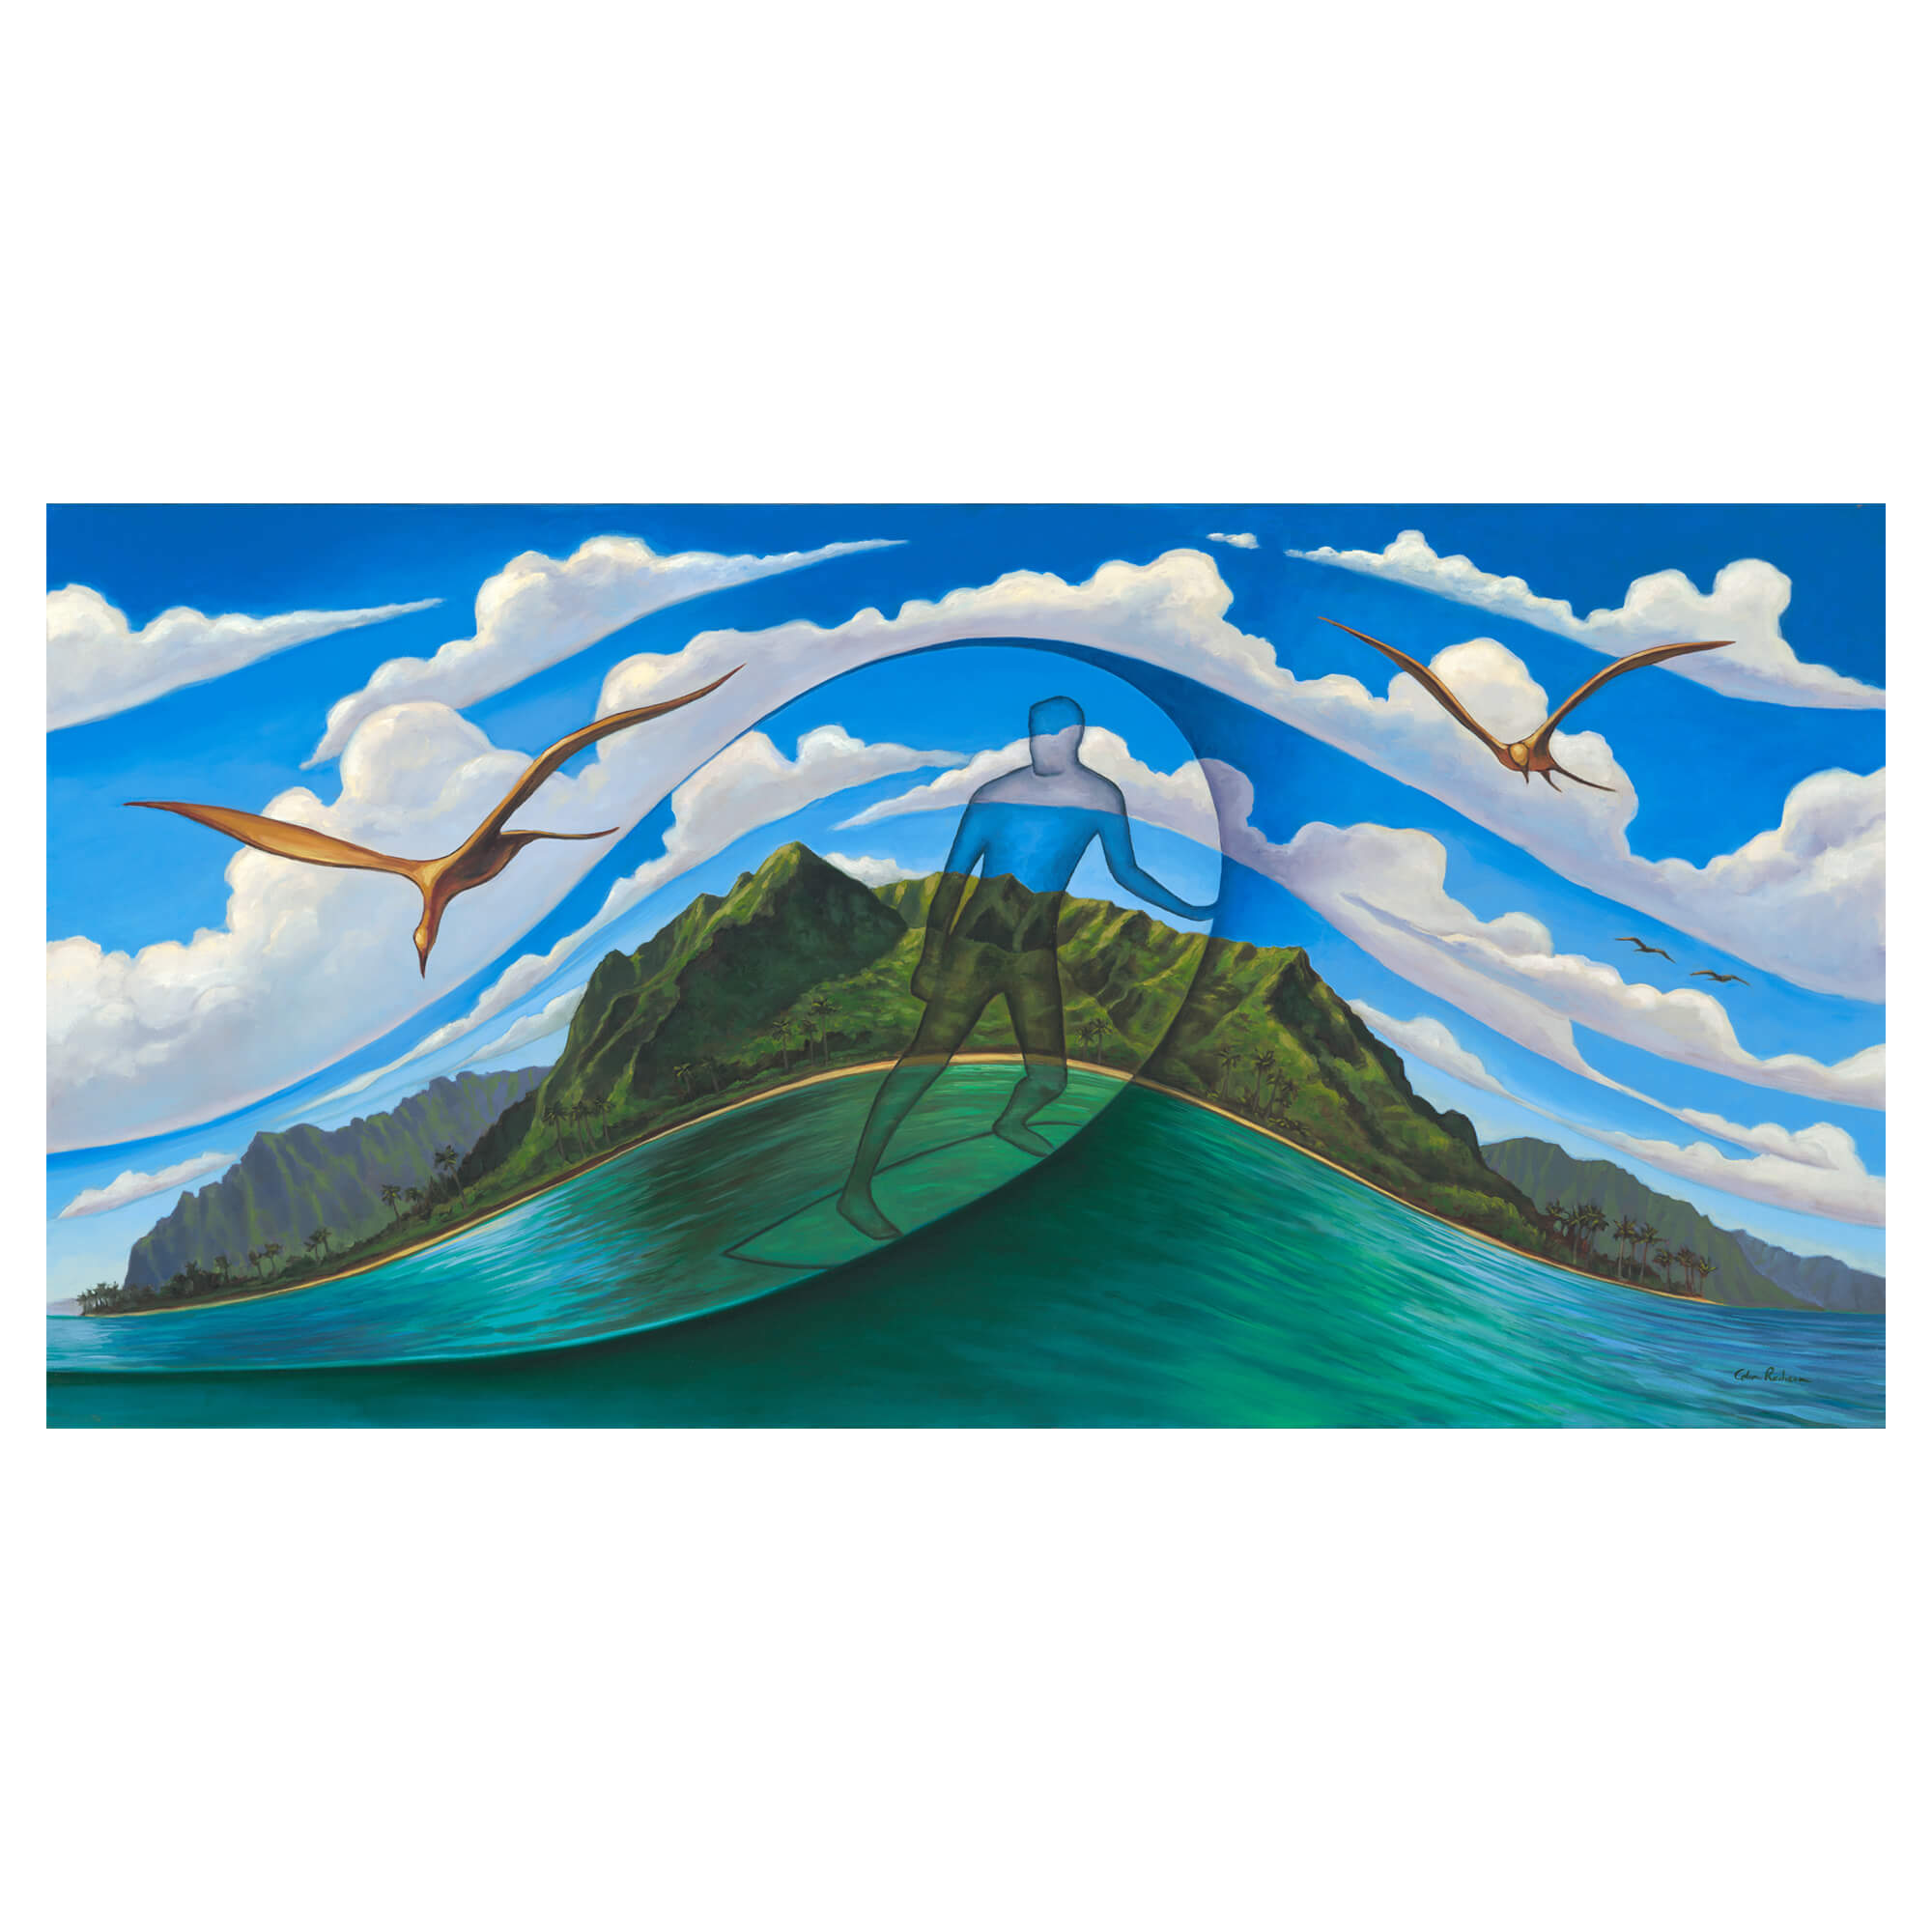 A tropical island with flying birds by Hawaii artist Colin Redican